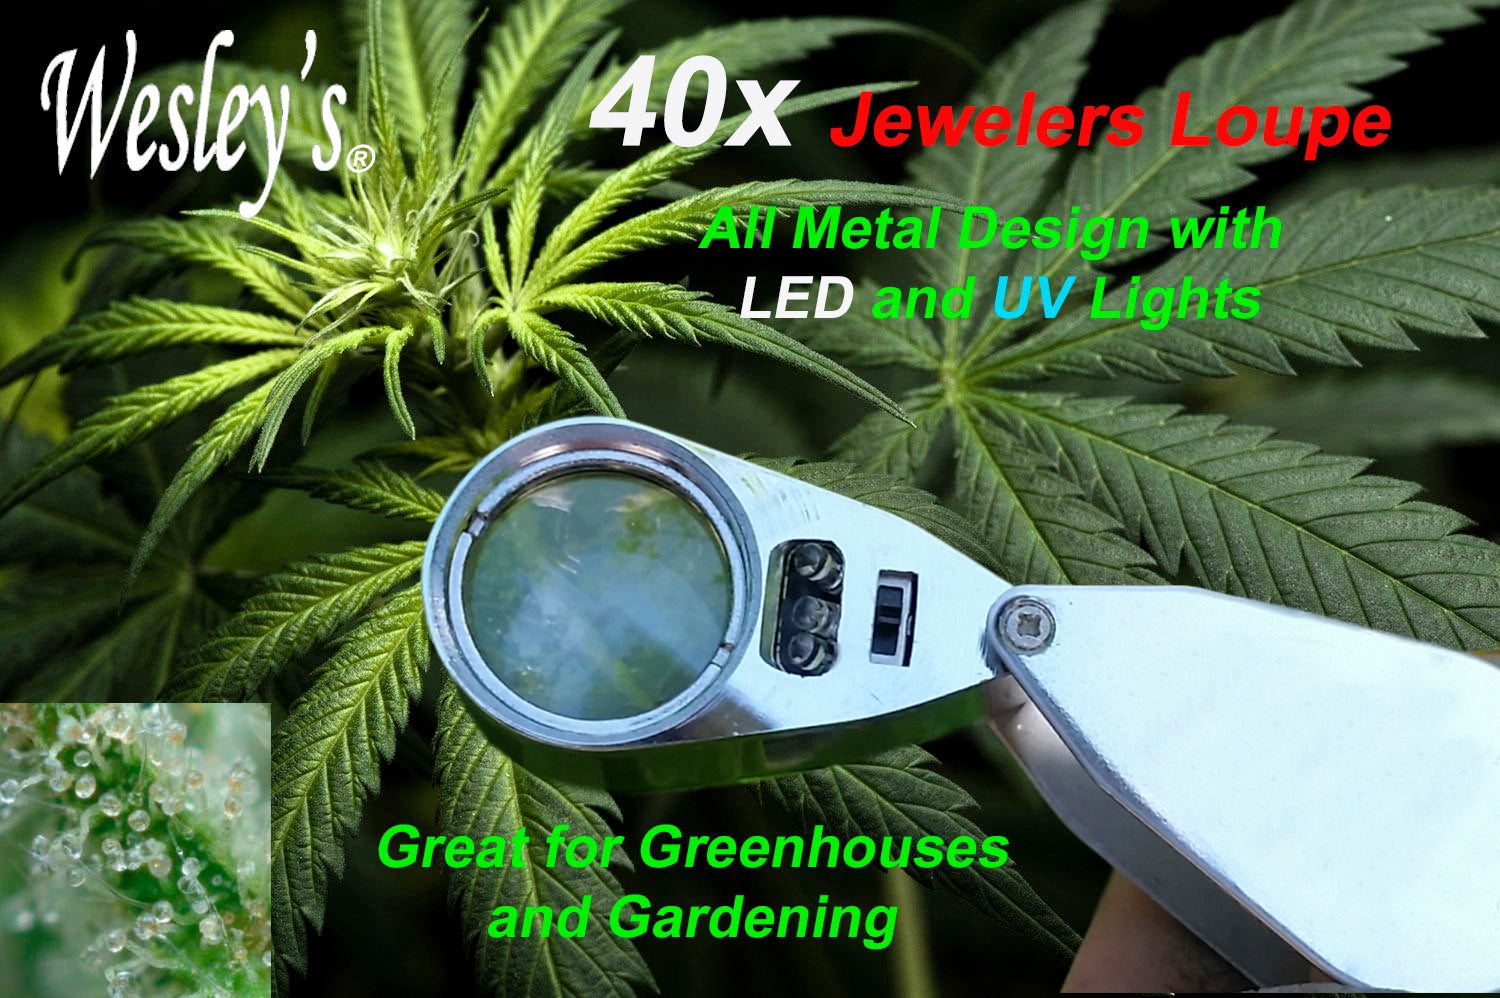 Jewelers Loupe 40x Magnifier with LED/UV Illumination and Unbreakable –  WESLEY'S AS YOU WISH